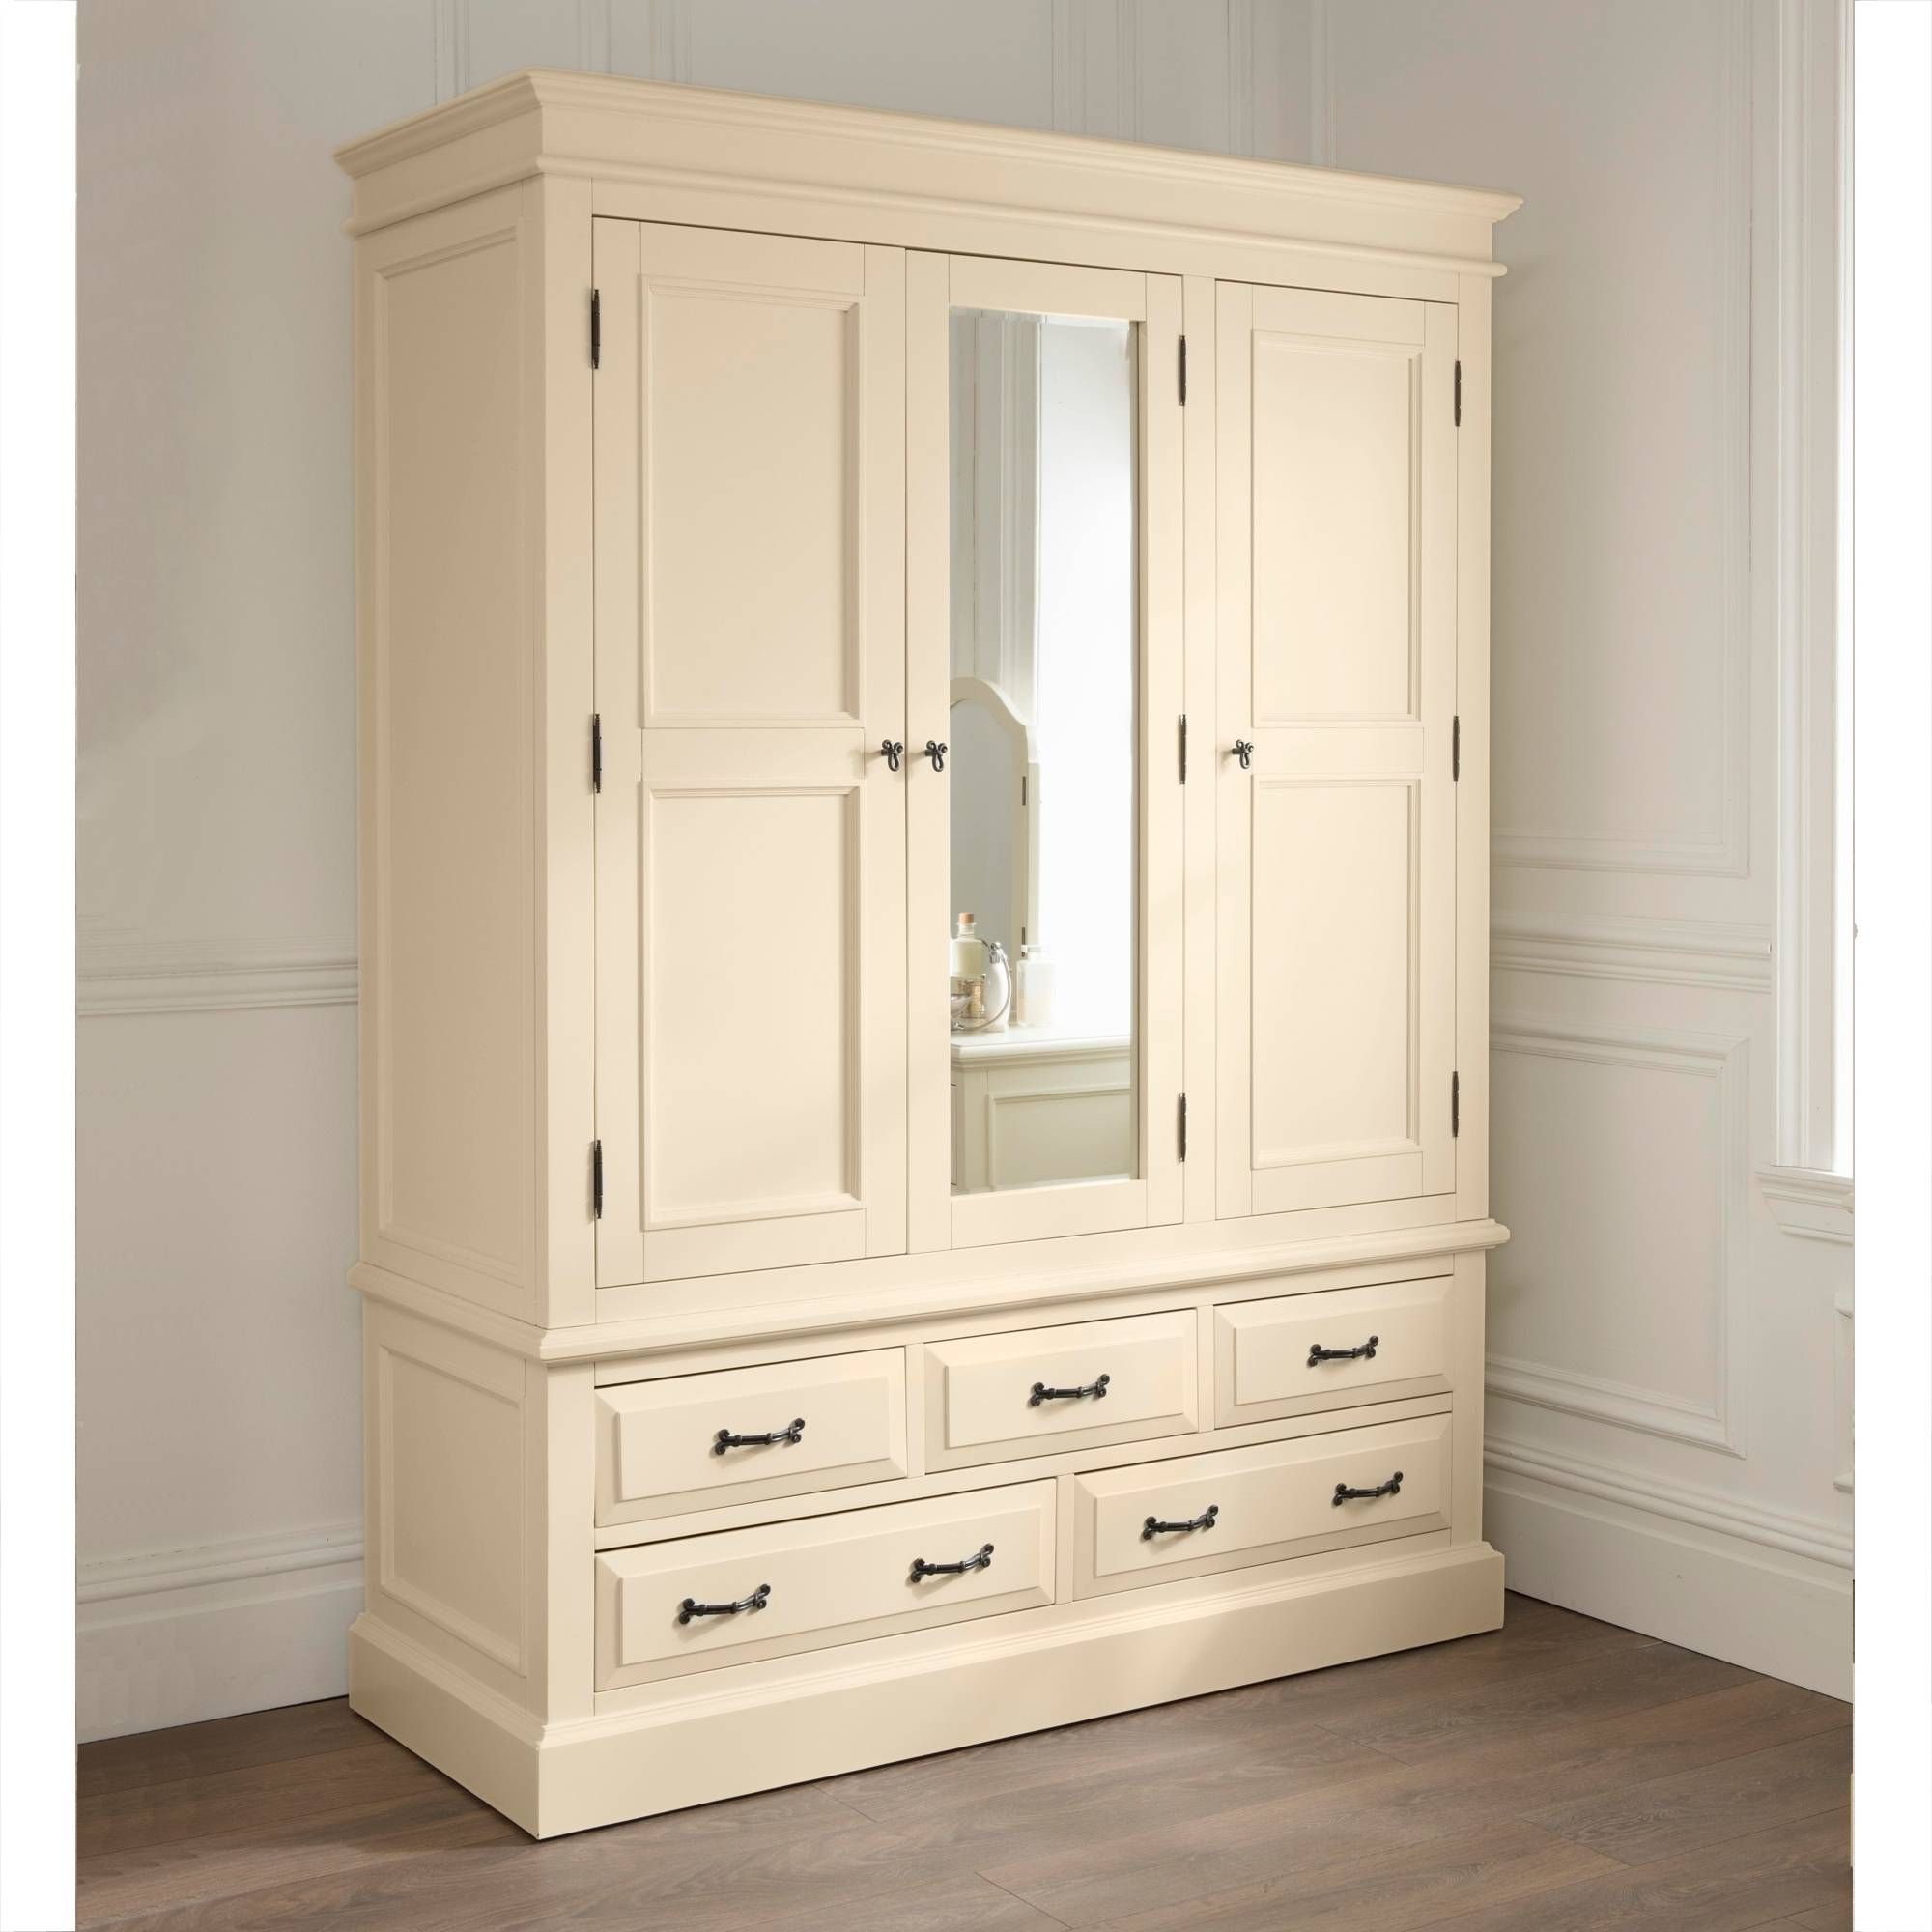 Shabby Chic Wardrobe Intended For White Shabby Chic Wardrobes (View 6 of 15)